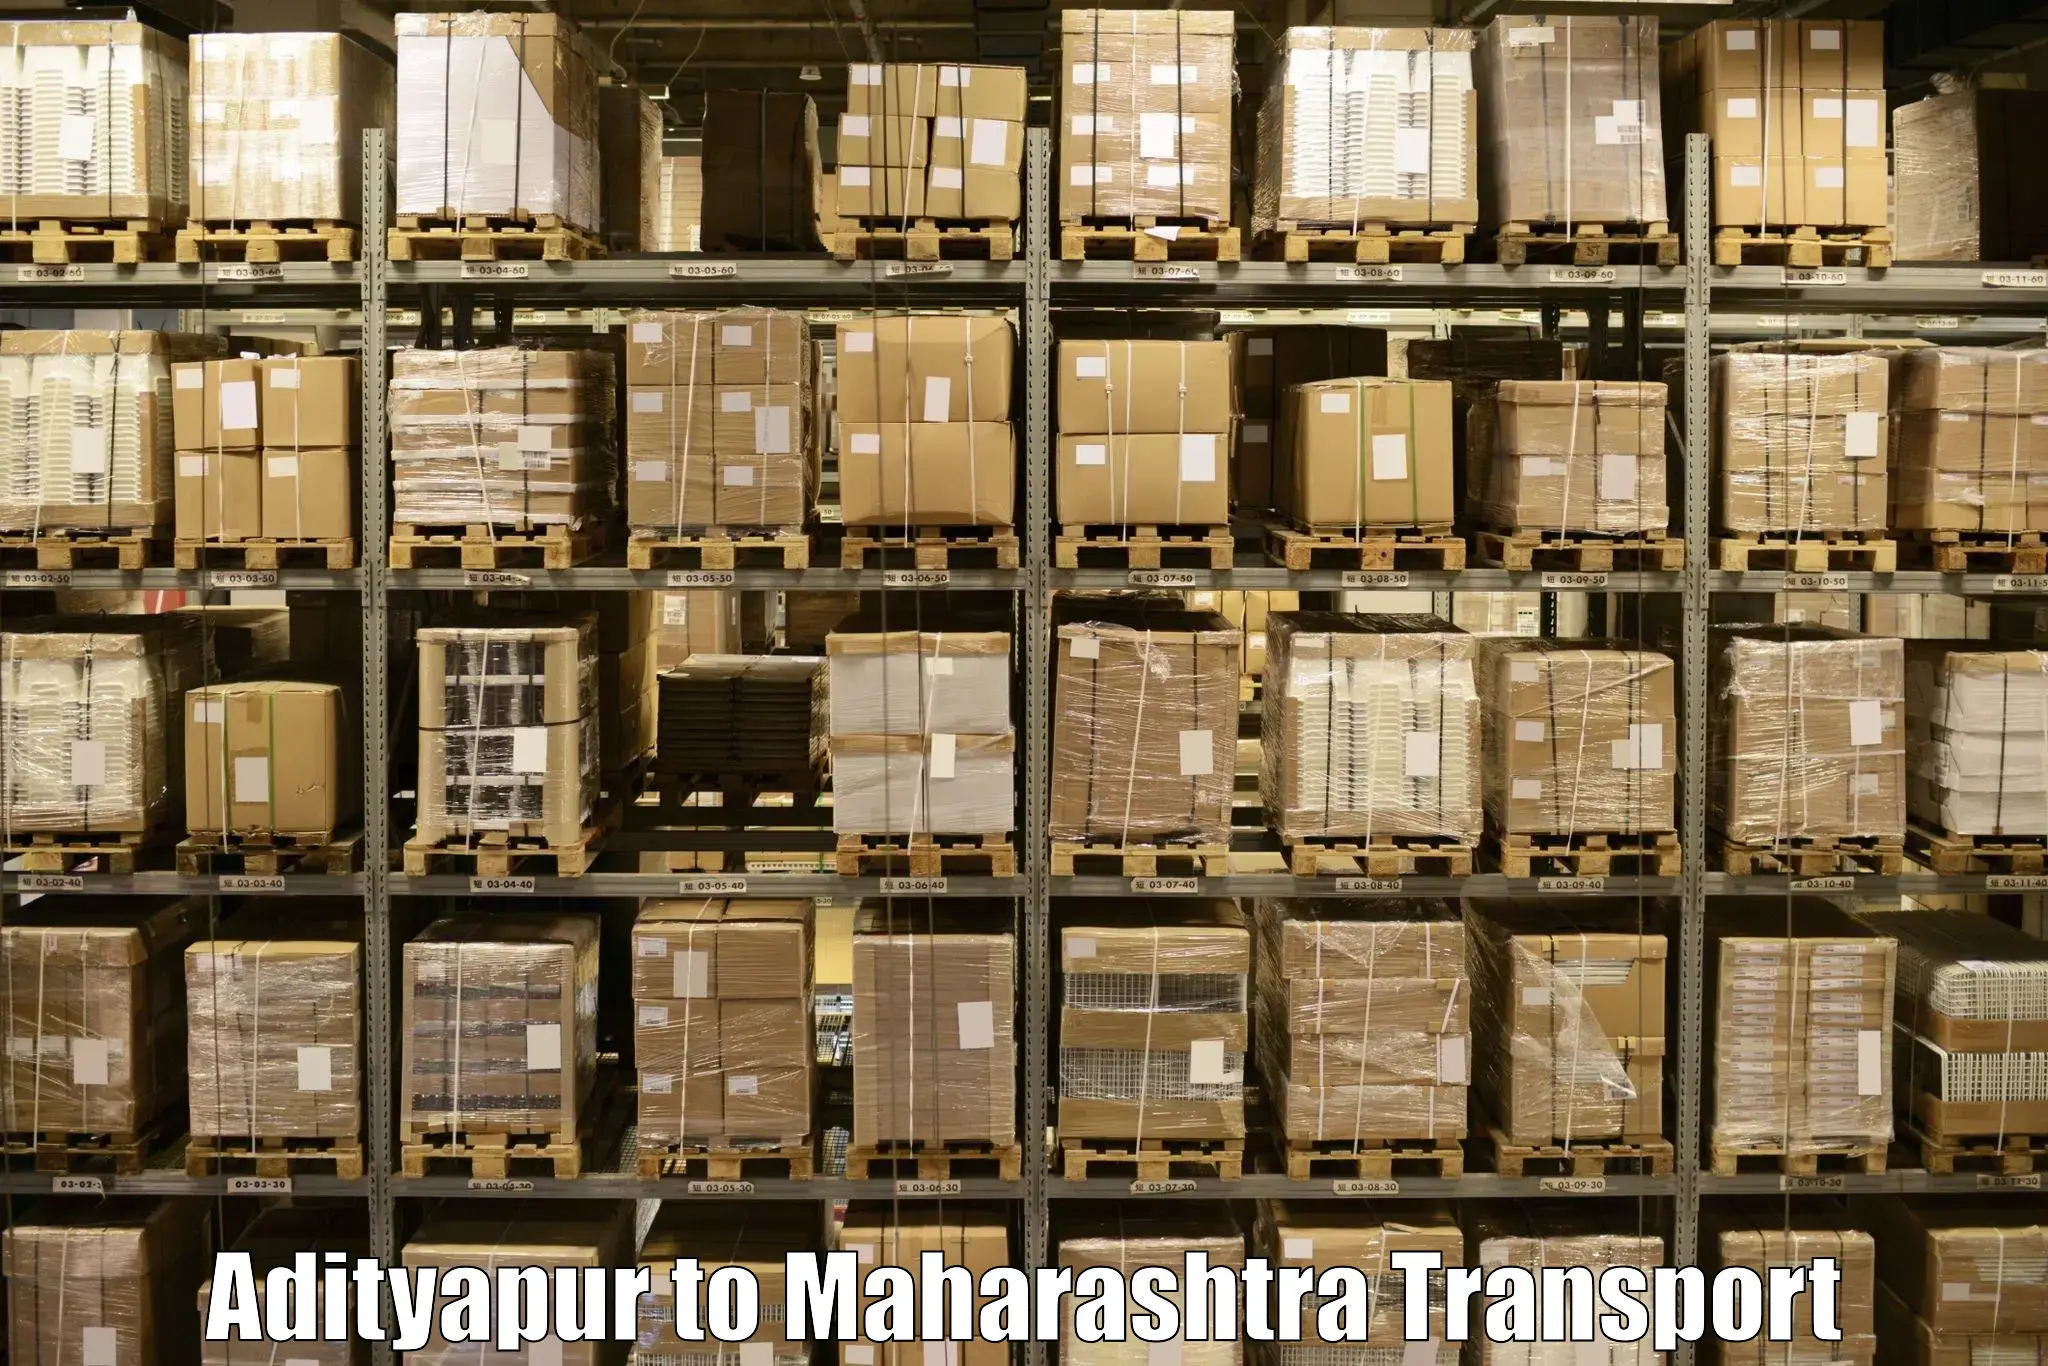 Commercial transport service Adityapur to Lonikand